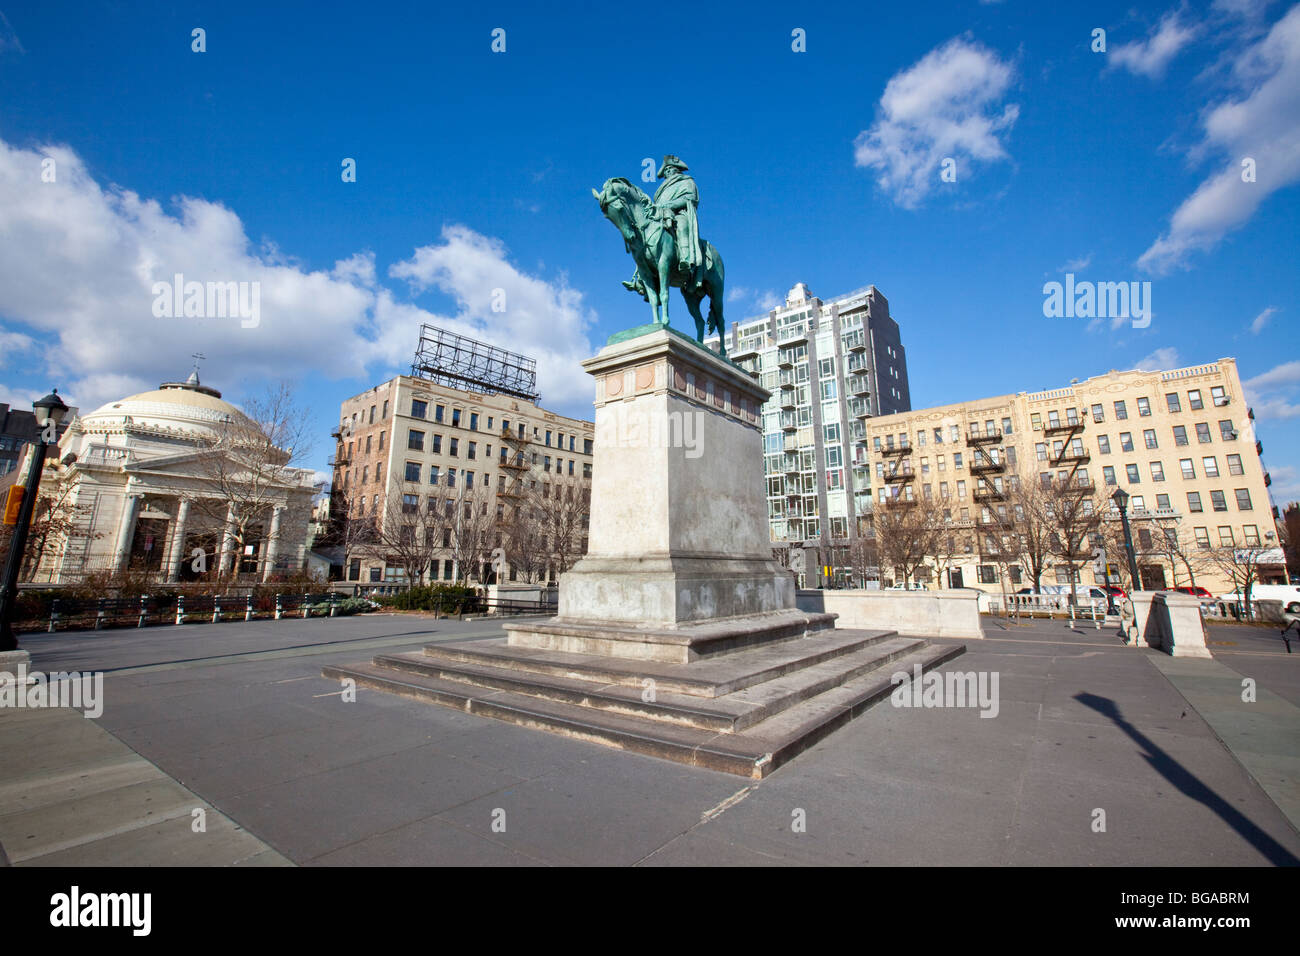 Monument to George Washington at Valley Forge in Continental Army Plaza, Brooklyn, New York Stock Photo